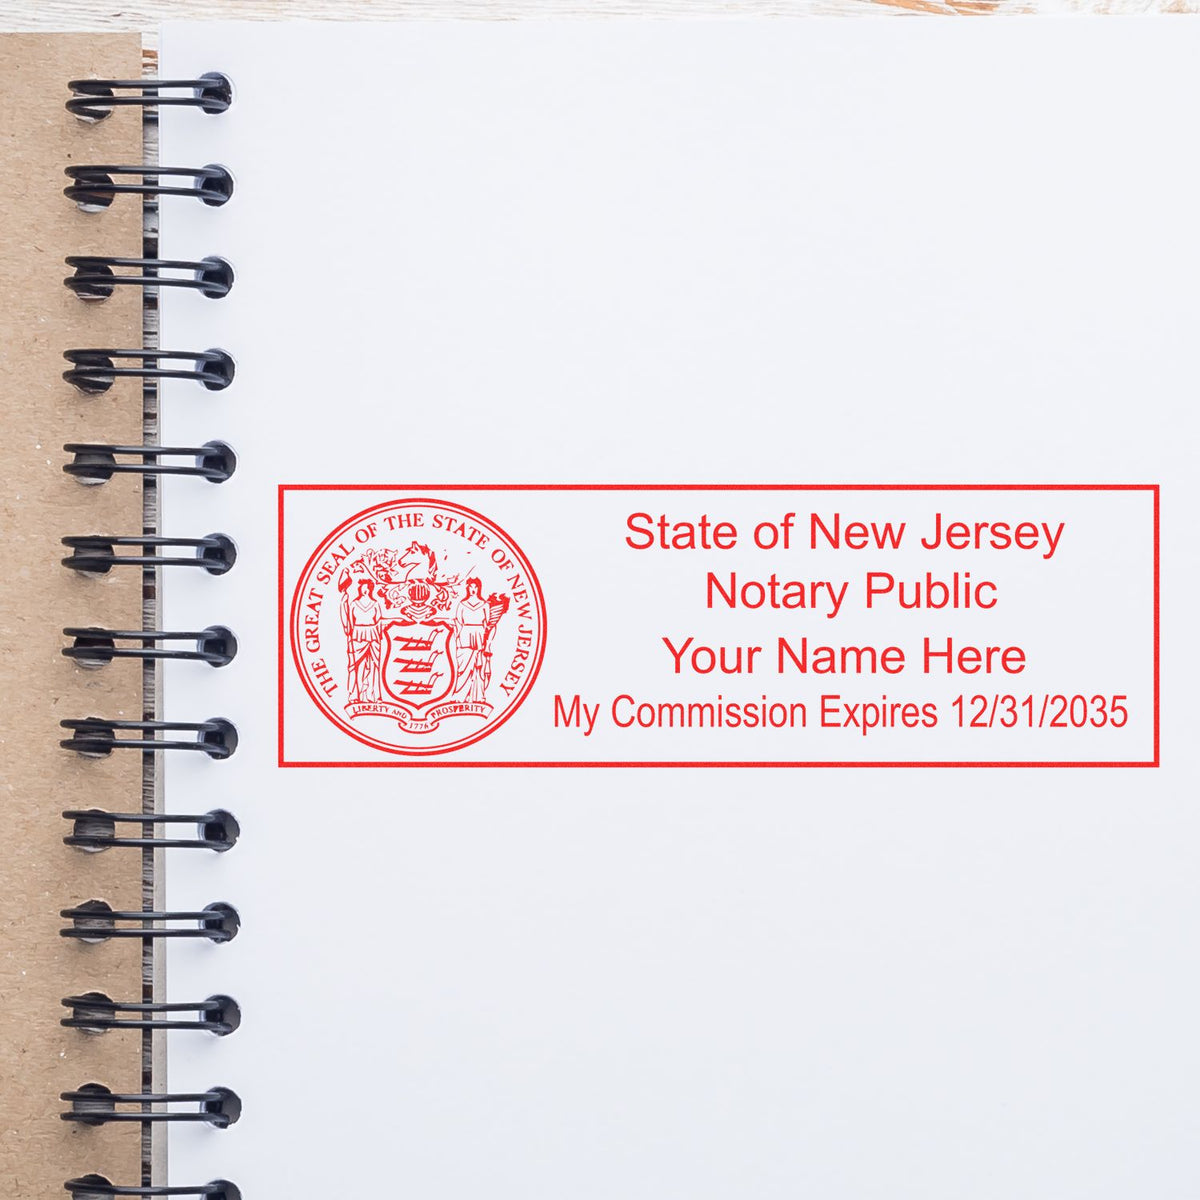 The Heavy-Duty New Jersey Rectangular Notary Stamp stamp impression comes to life with a crisp, detailed photo on paper - showcasing true professional quality.